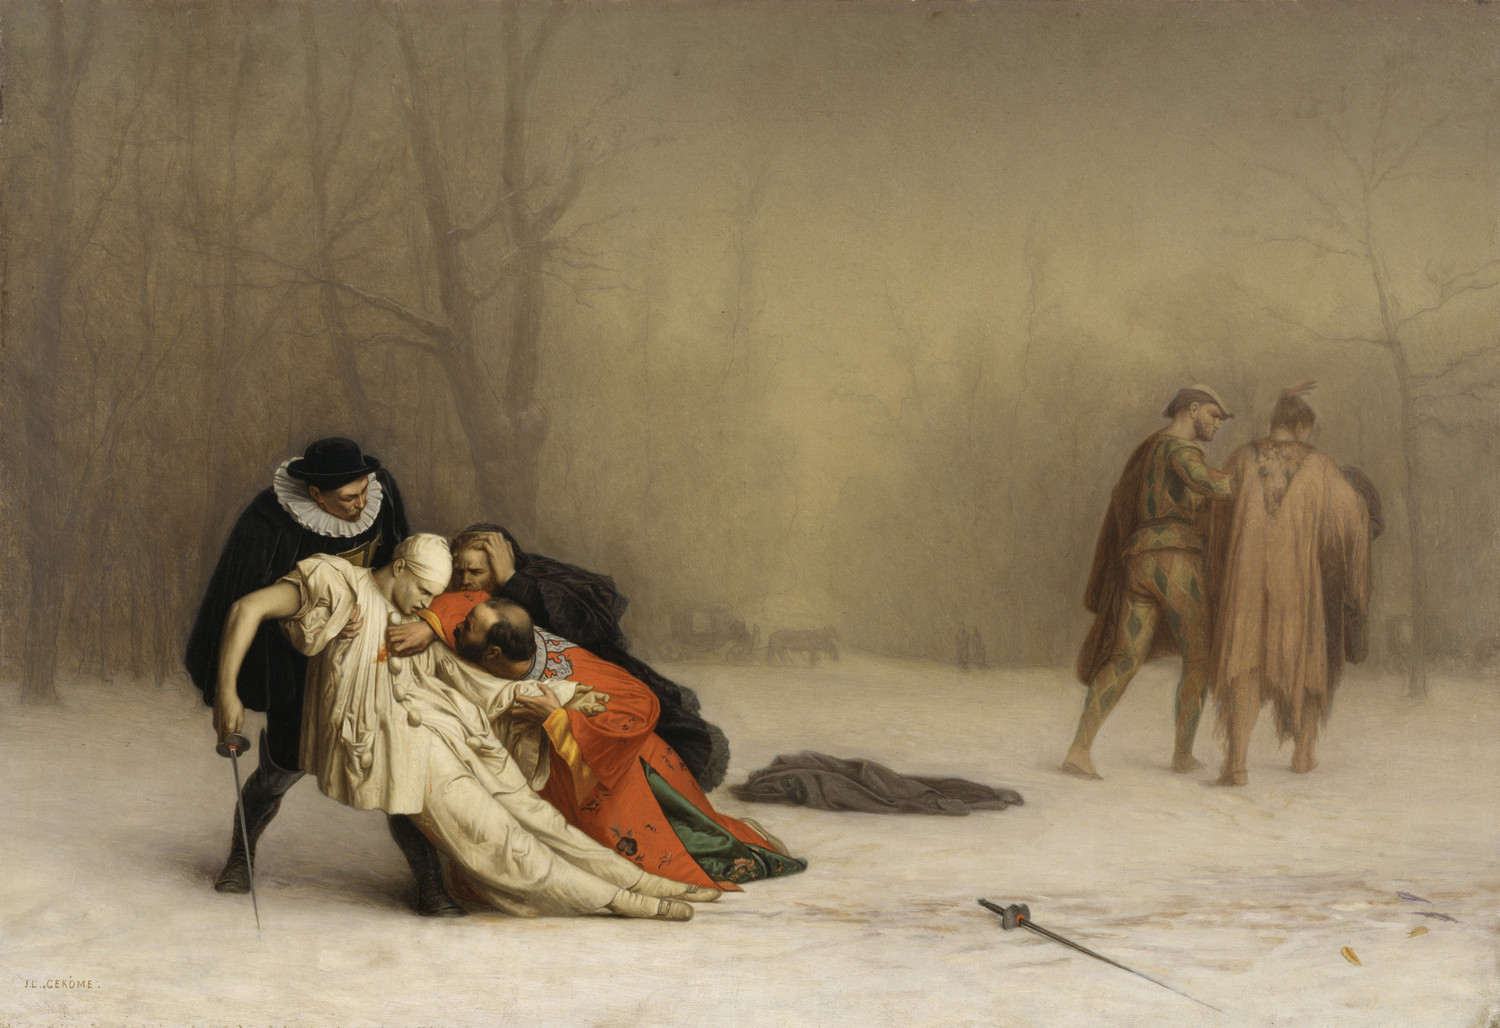 A duelist in white clothes lies injured in the arms of his friend dressed in black and his lover in red while the other duelist walks away in the mist